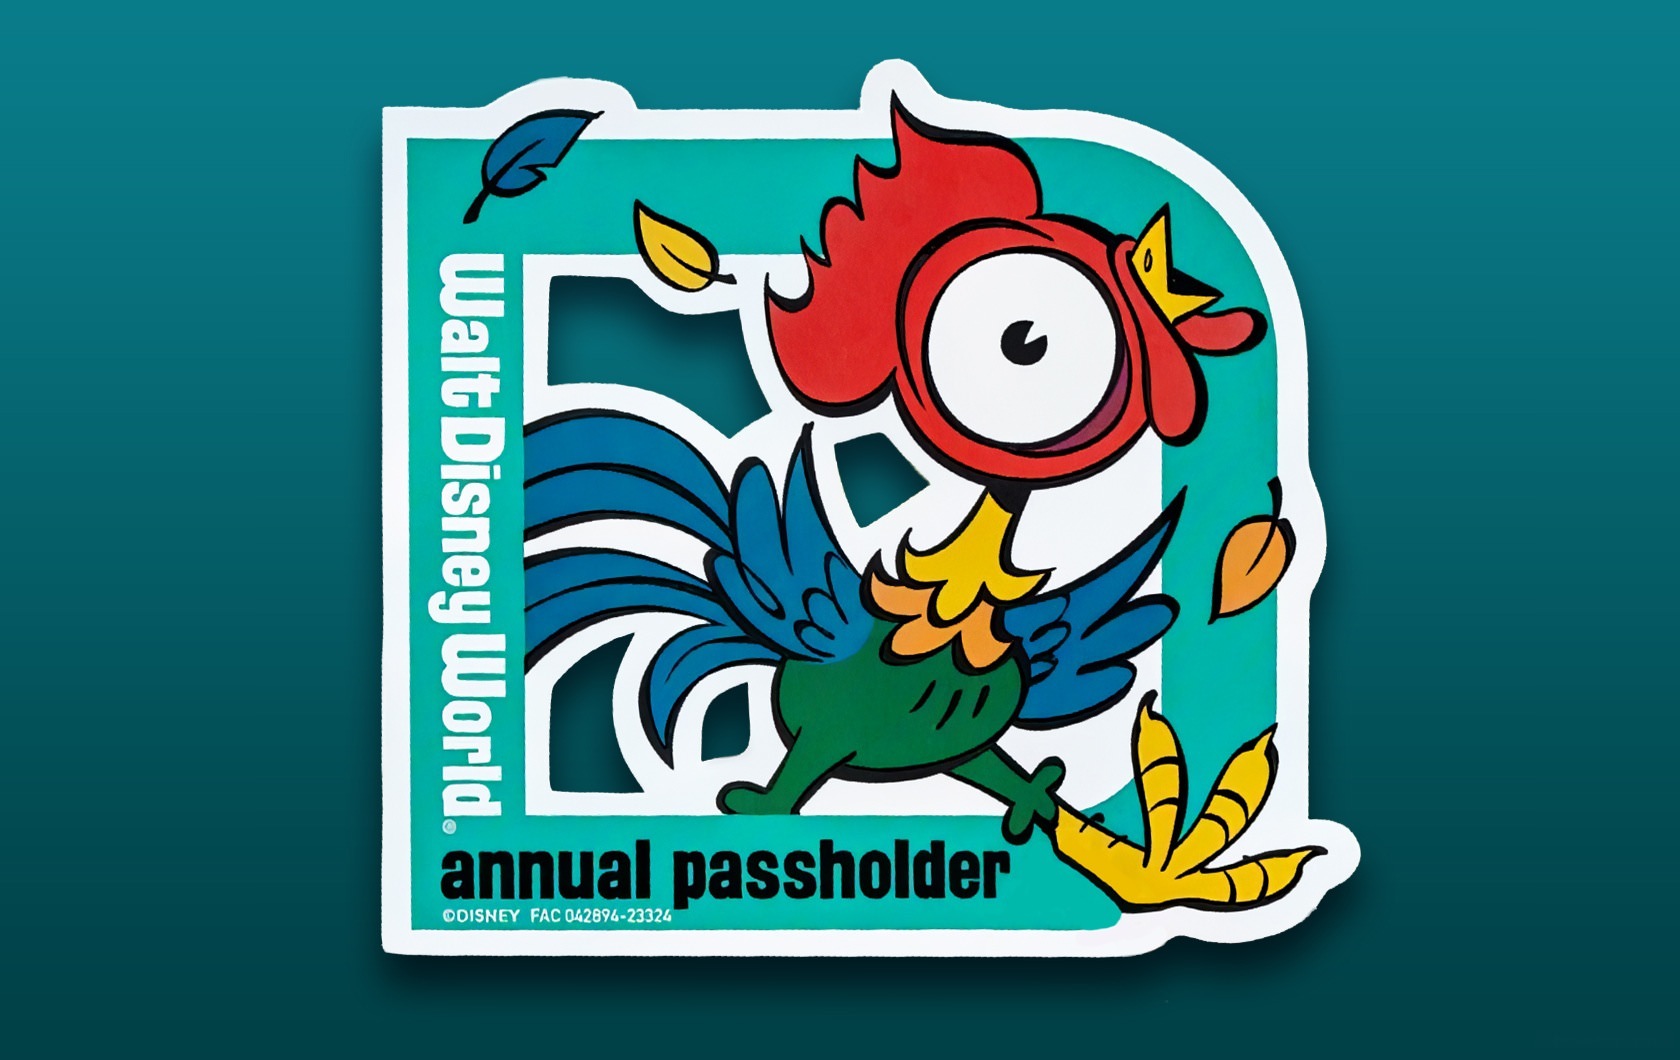 There's a New Walt Disney World Annual Passholder Magnet, and it's a Chicken.